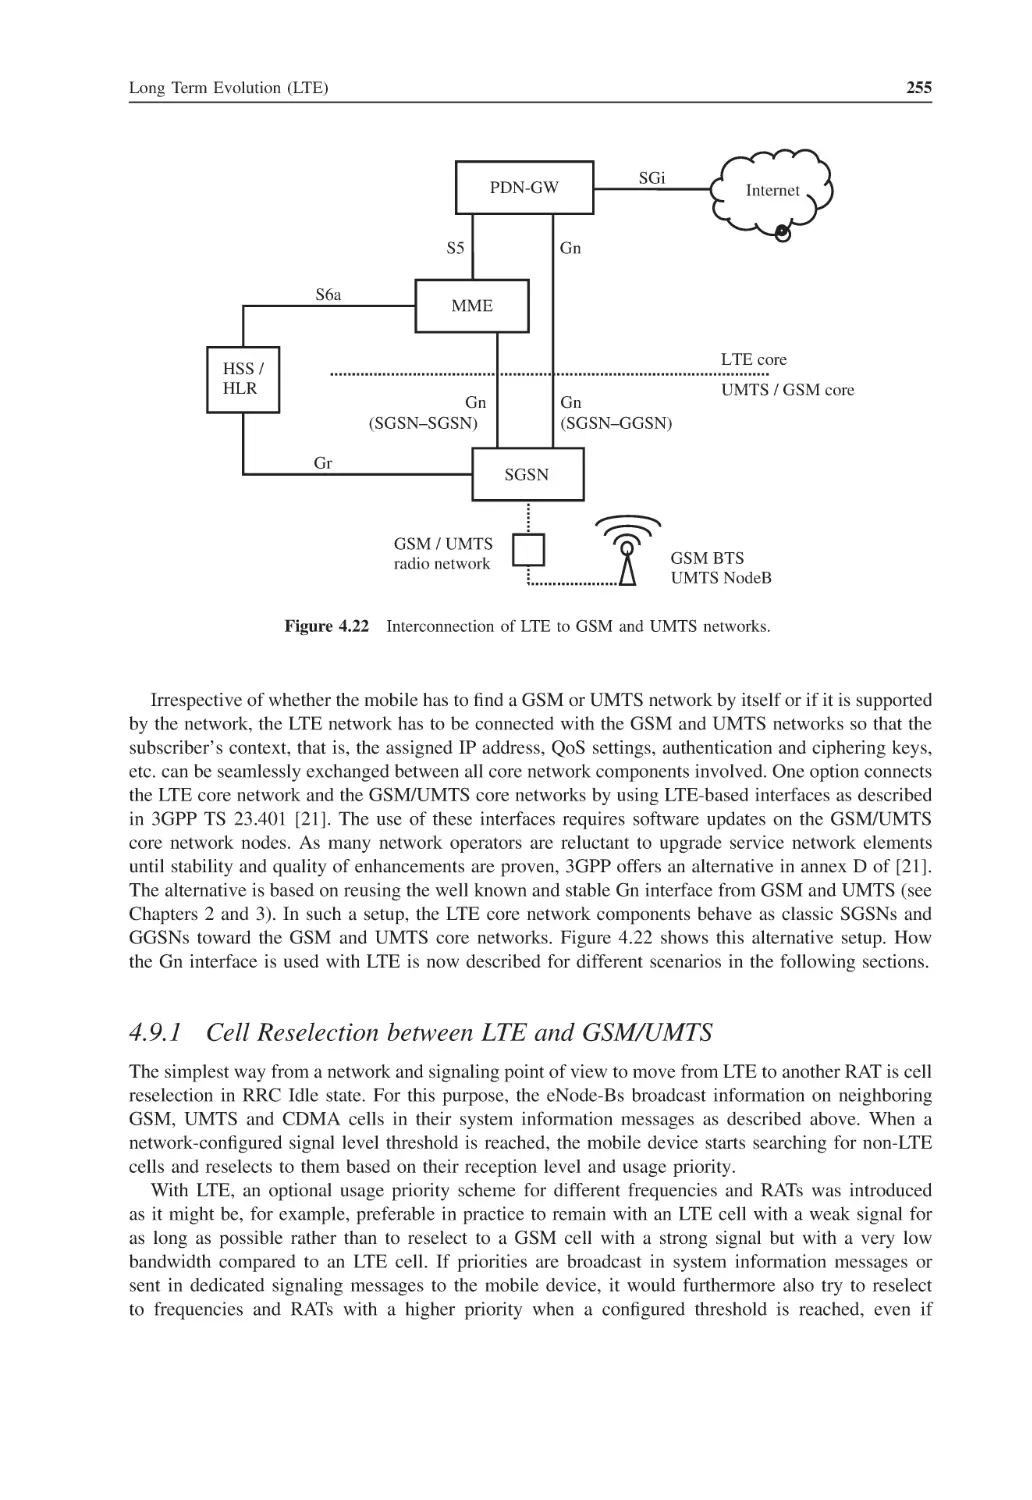 4.9.1 Cell Reselection between LTE and GSM/UMTS